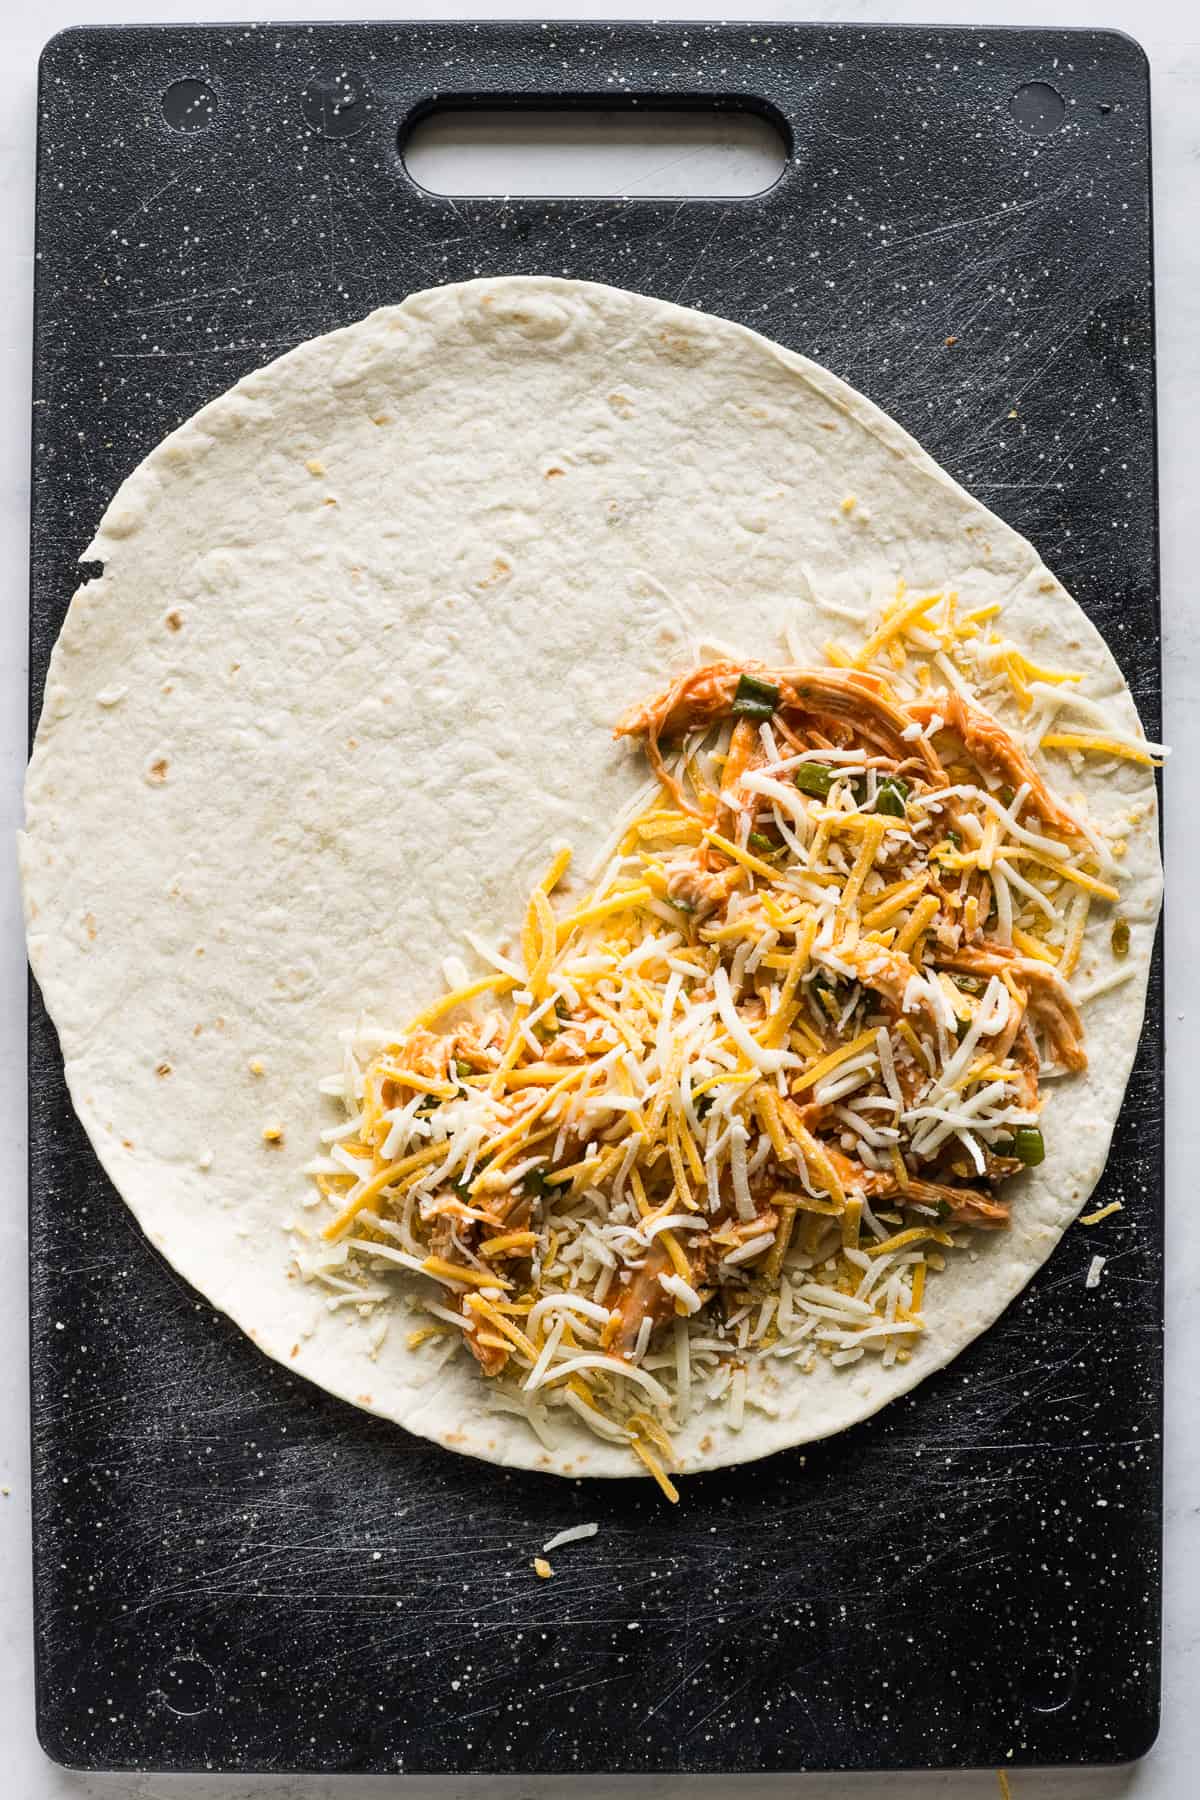 A flour tortilla filled with buffalo chicken and shredded cheese.